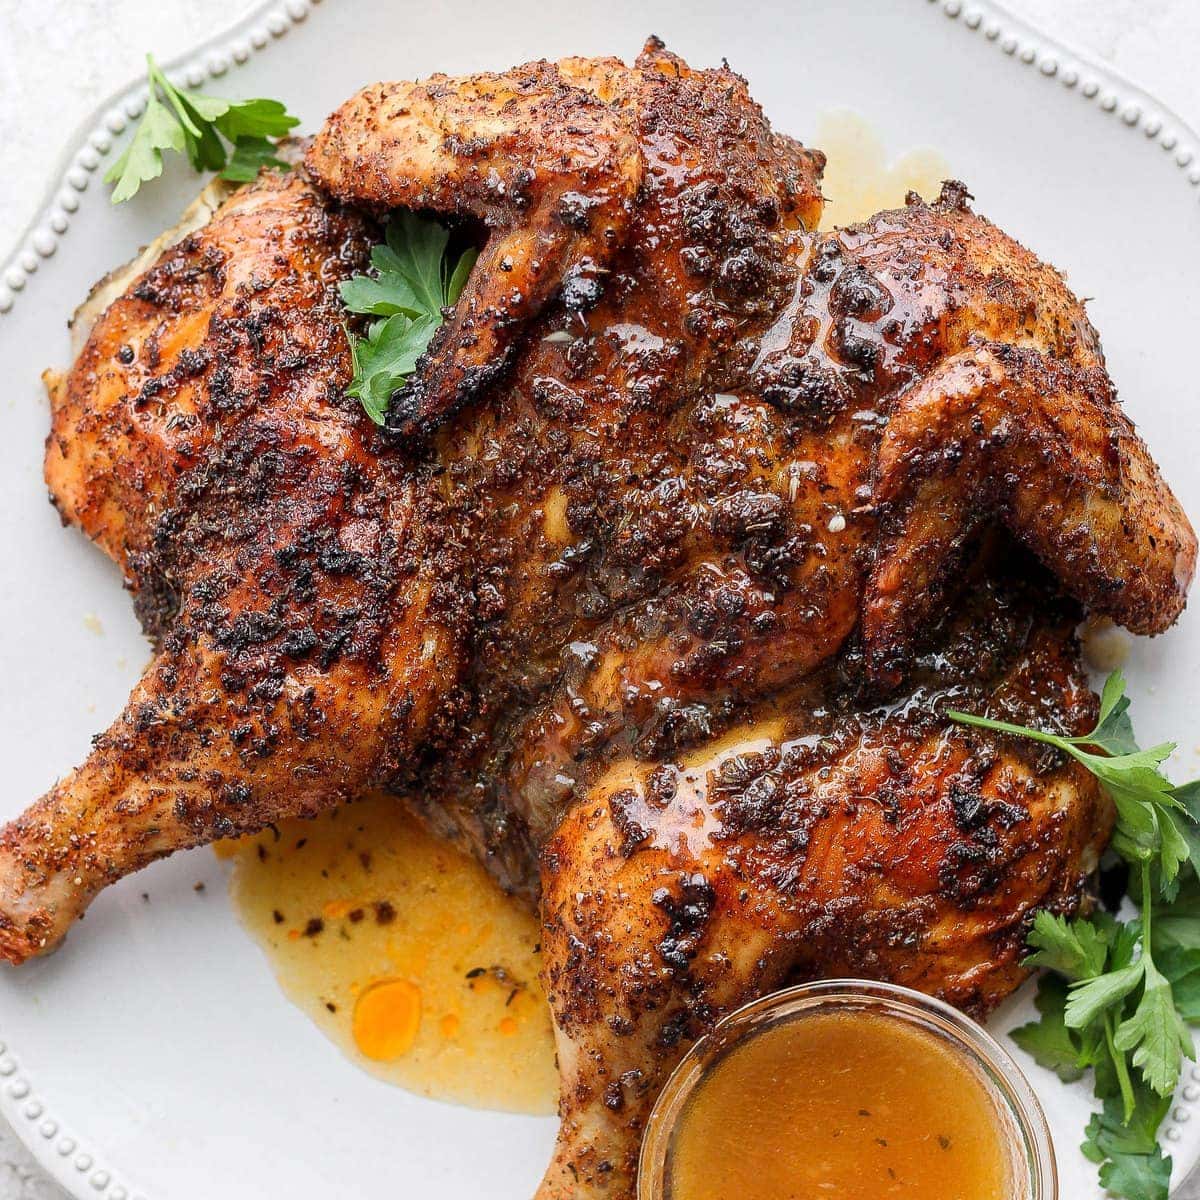 https://fitfoodiefinds.com/wp-content/uploads/2021/02/spatchcock-chicken-10sq.jpg